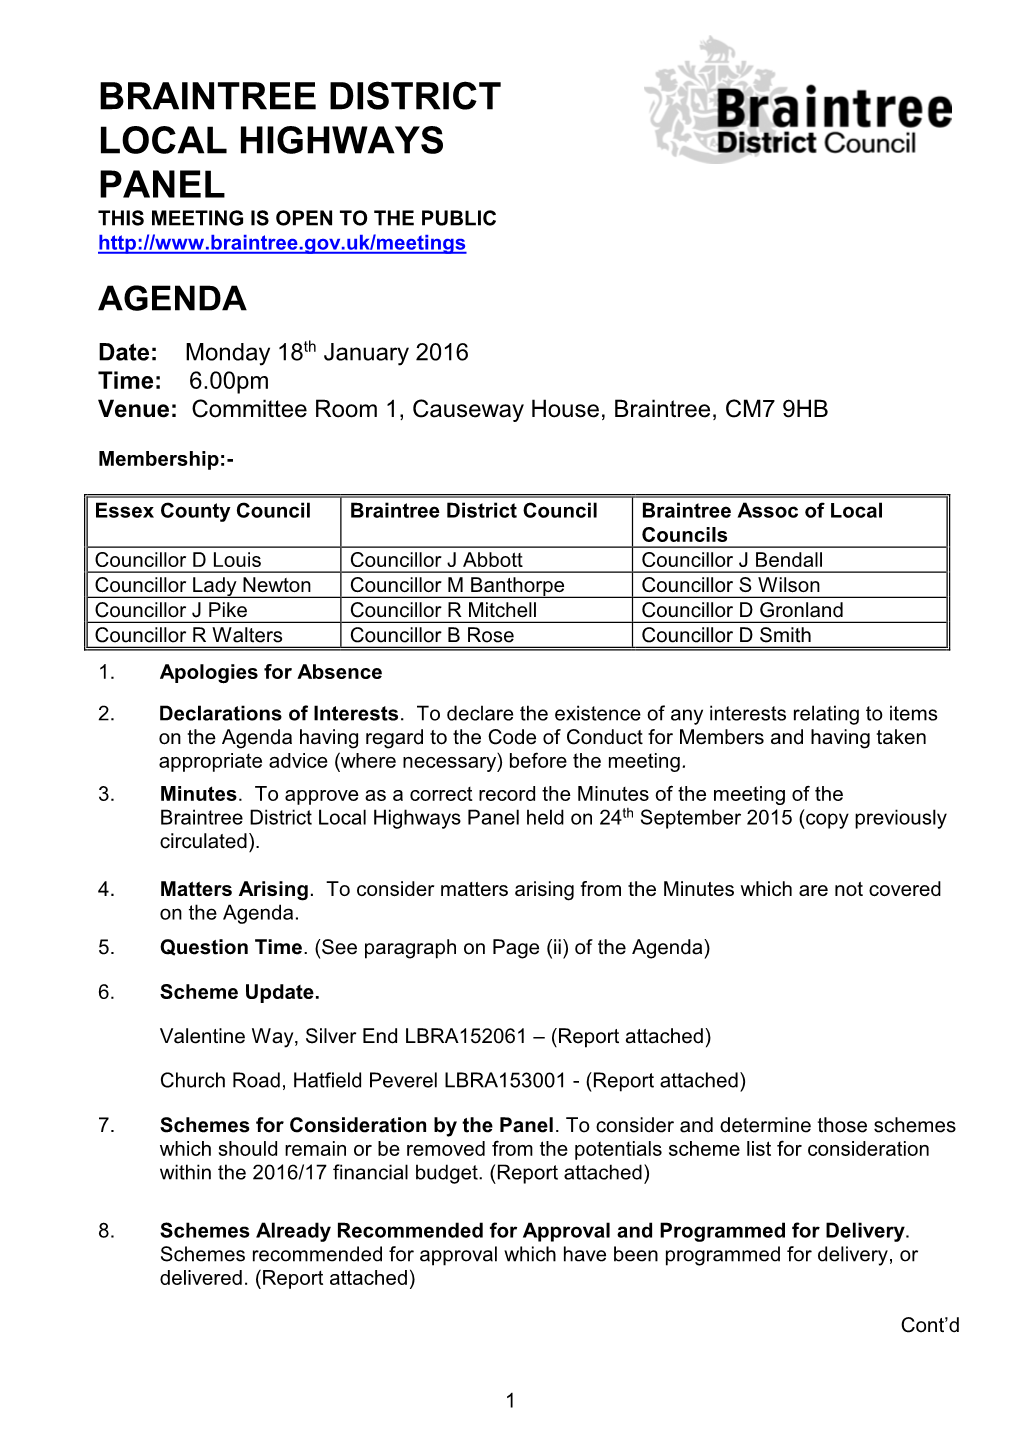 Braintree District Local Highways Panel Held on 24Th September 2015 (Copy Previously Circulated)